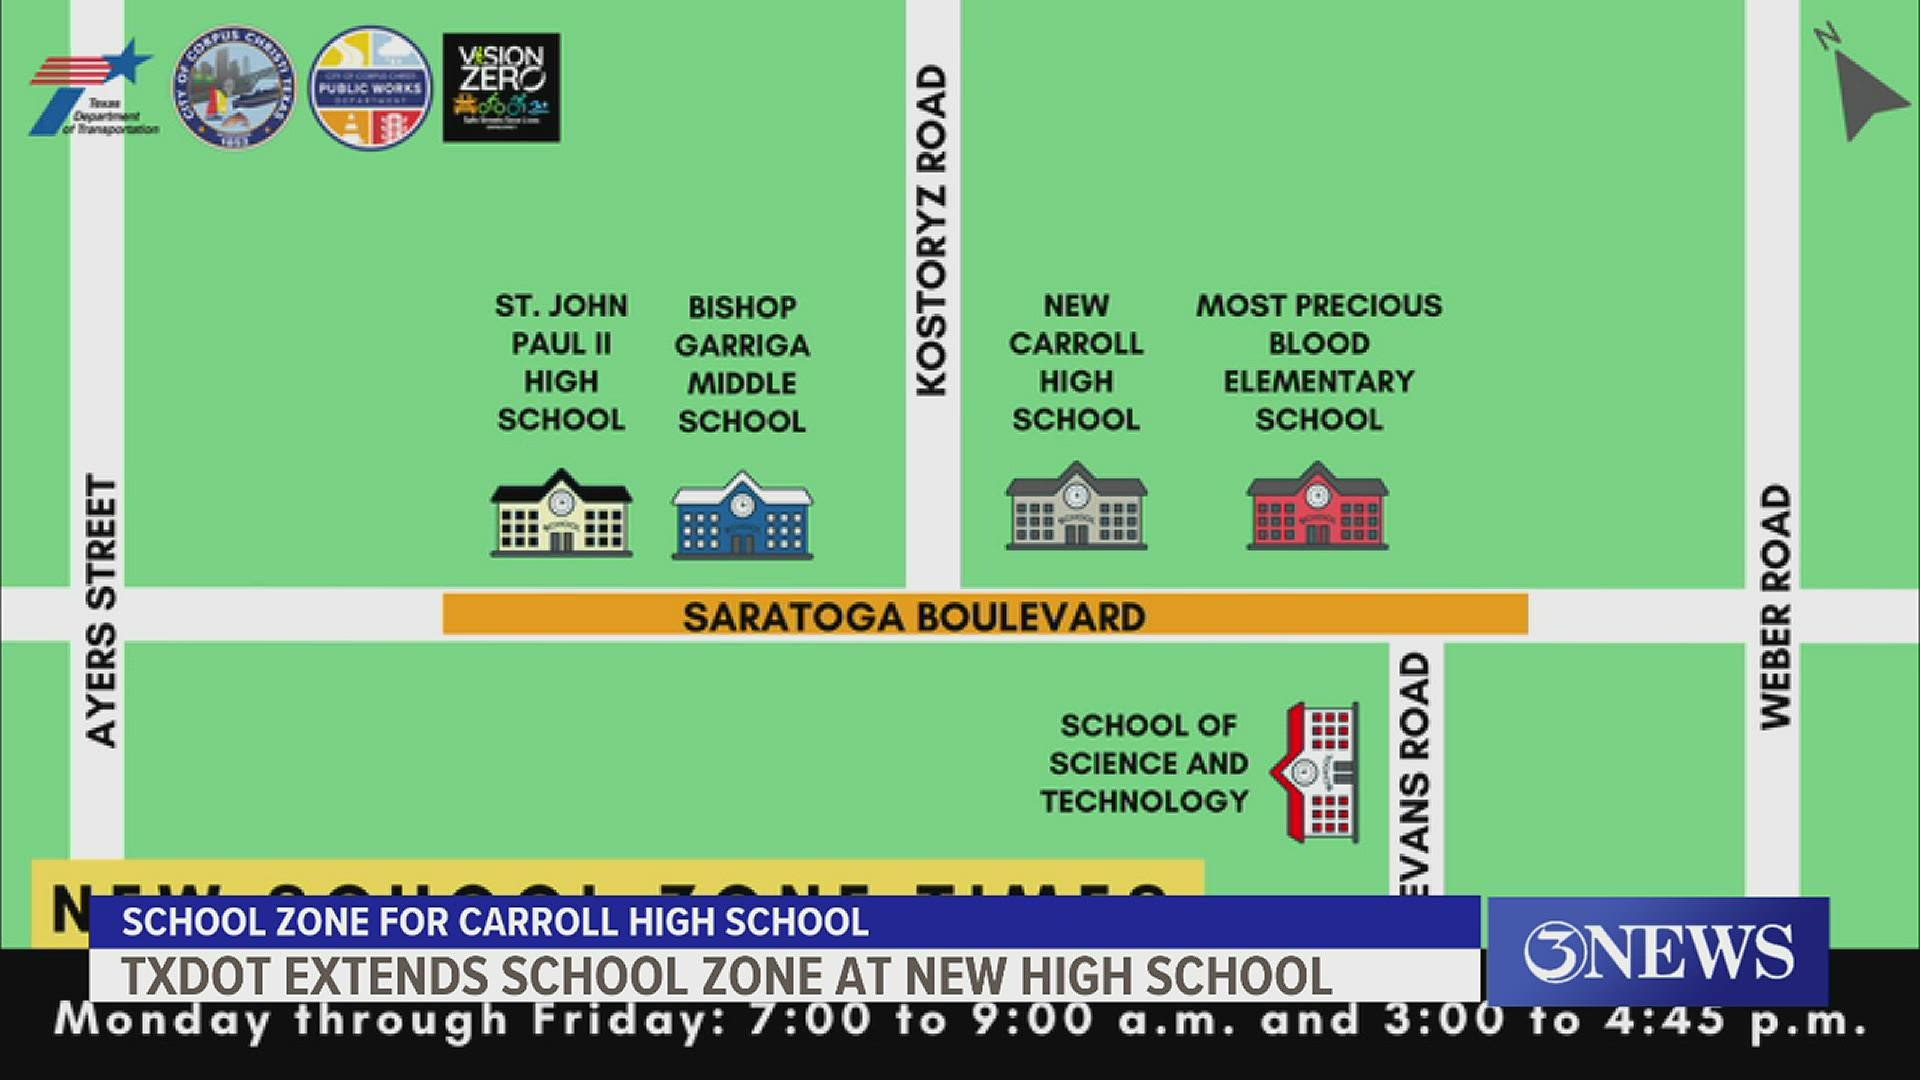 This comes after a 3NEWS report that the new high school was missing school zones at the start of the school year.